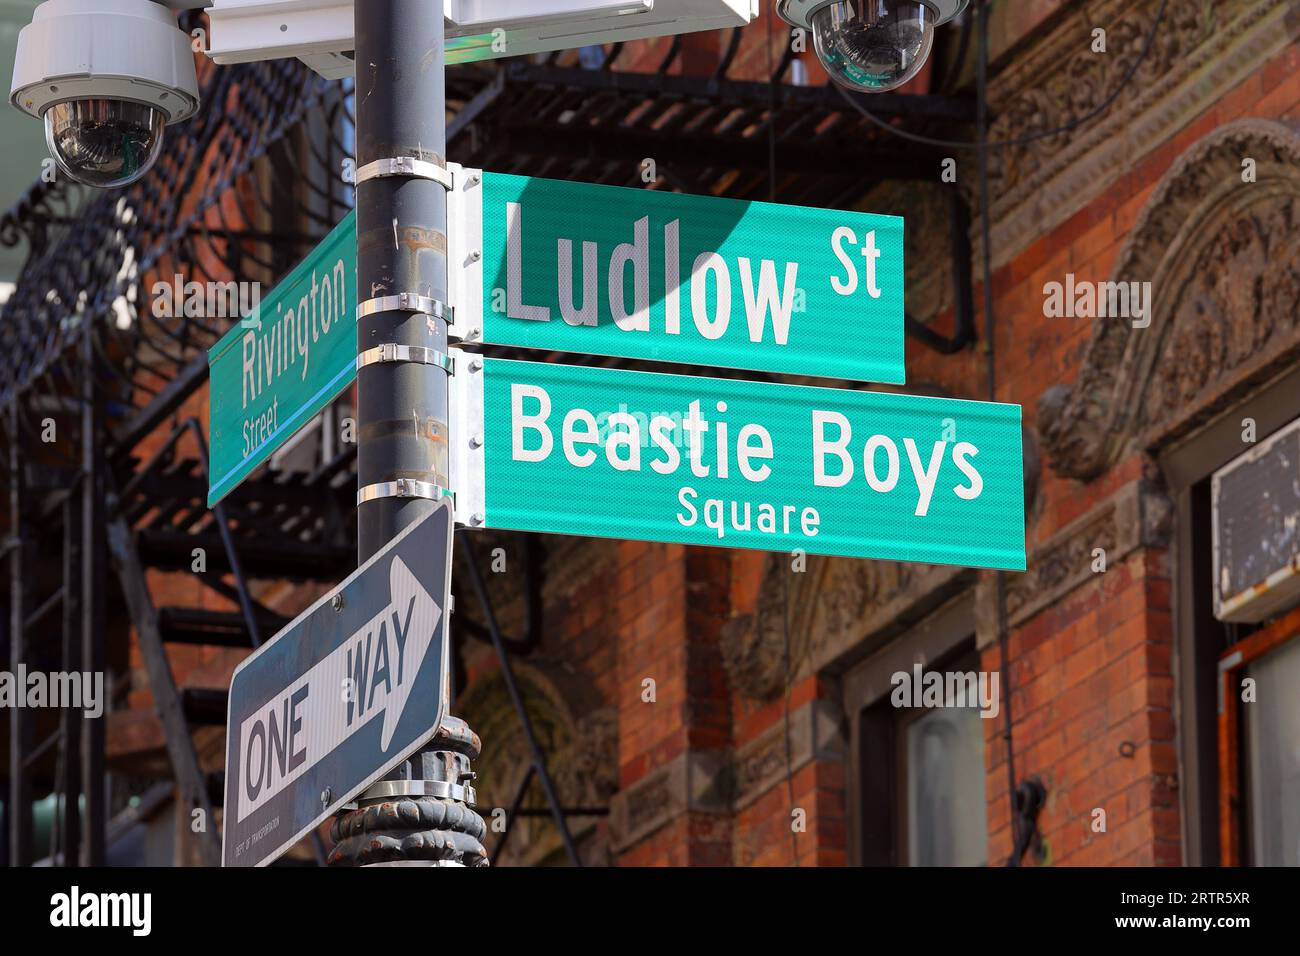 Signage for Beastie Boys Square on the corner of Rivington St and Ludlow St in Manhattan's Lower East Side, New York City Stock Photo